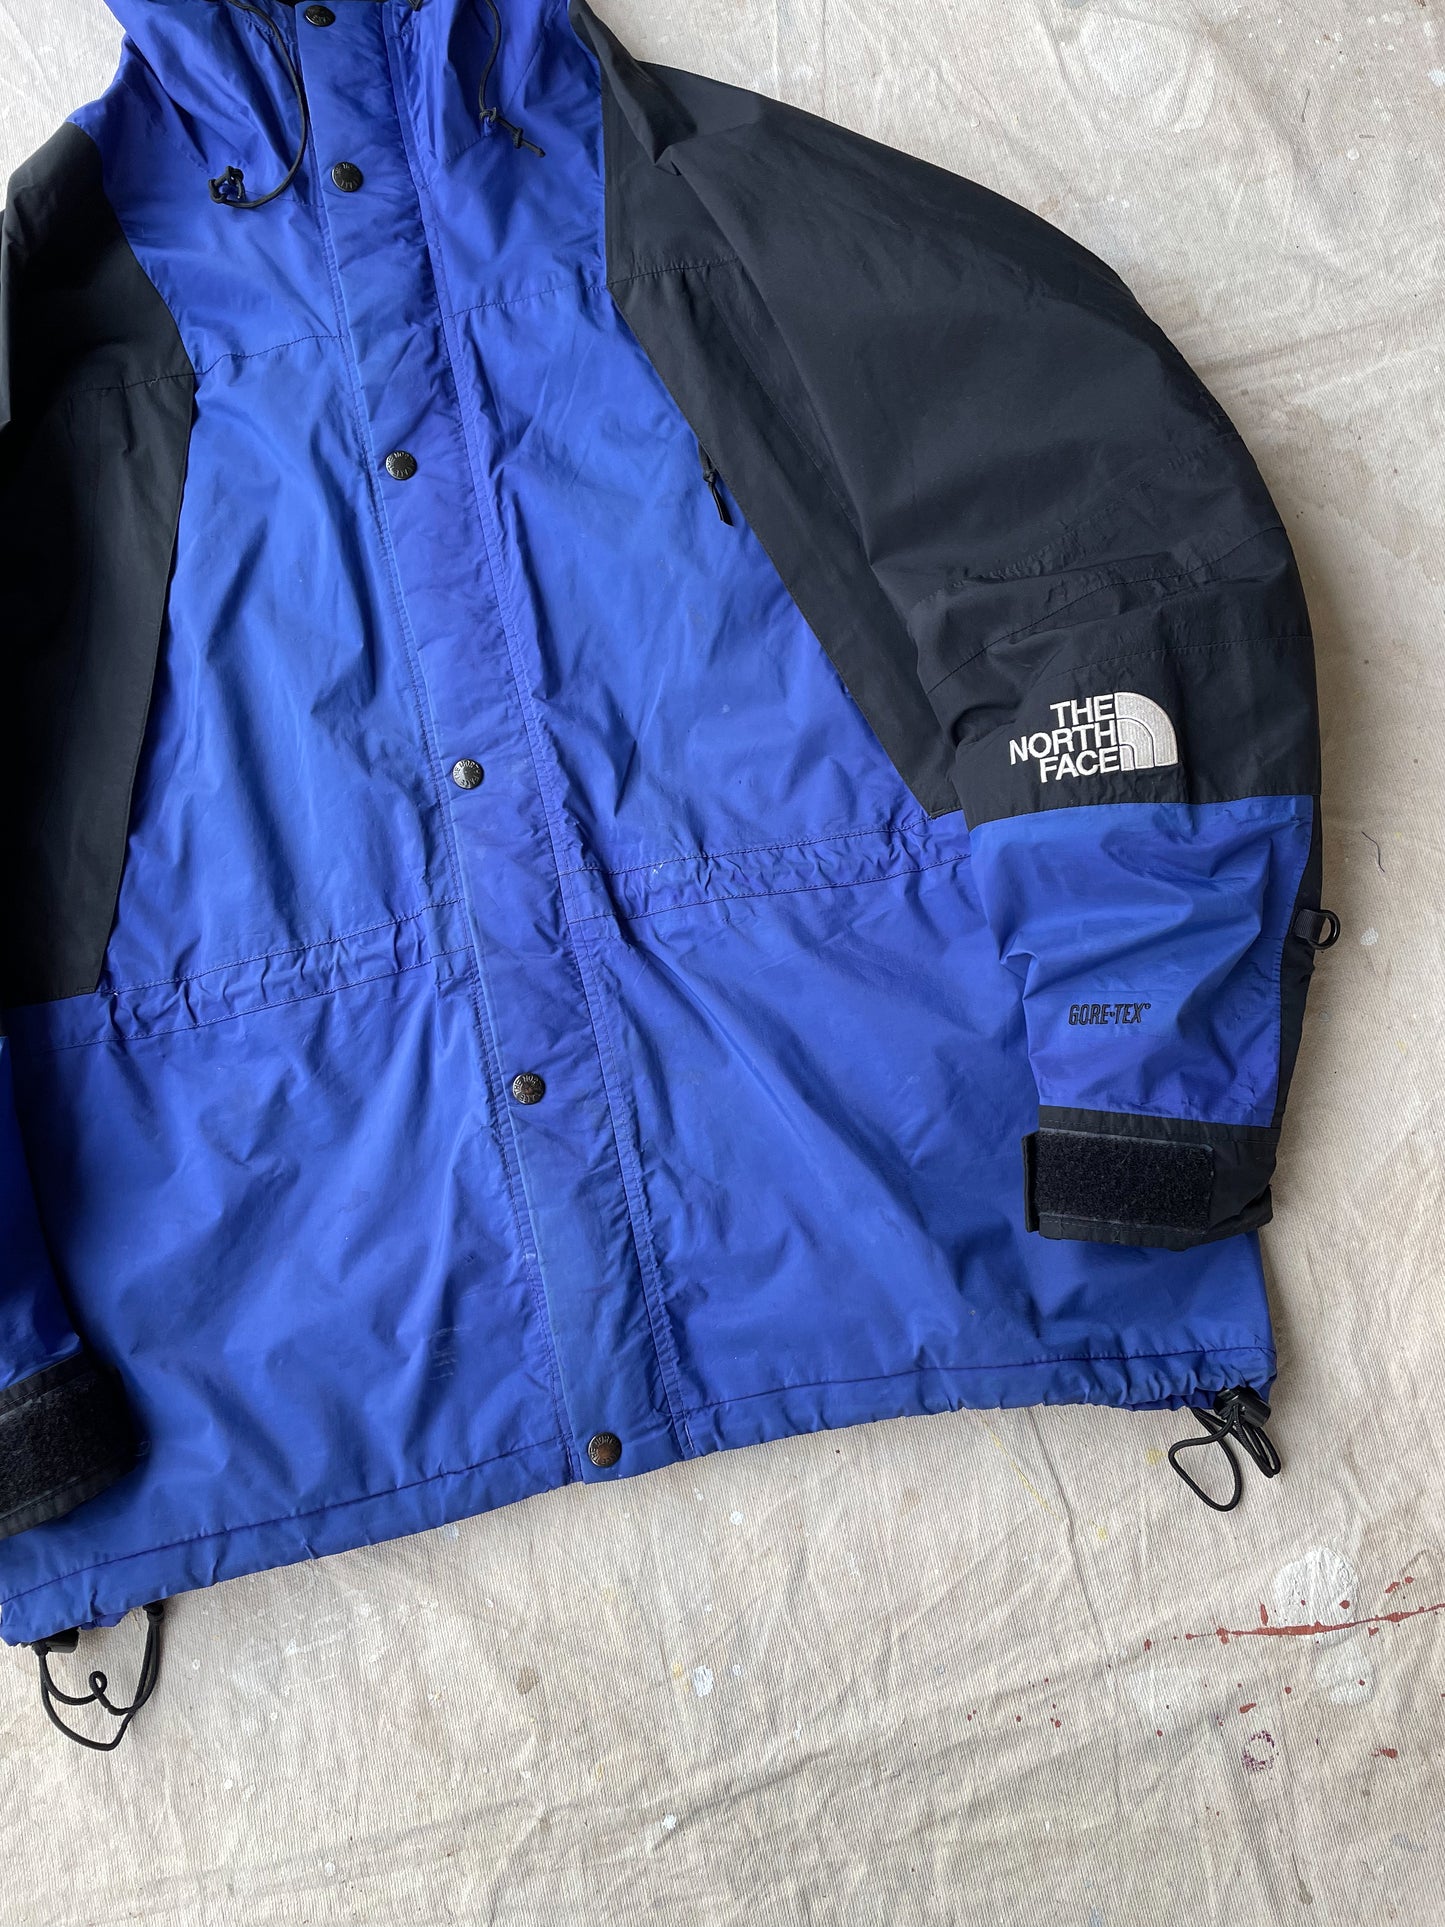 THE NORTH FACE JACKET—BLUE [XL]